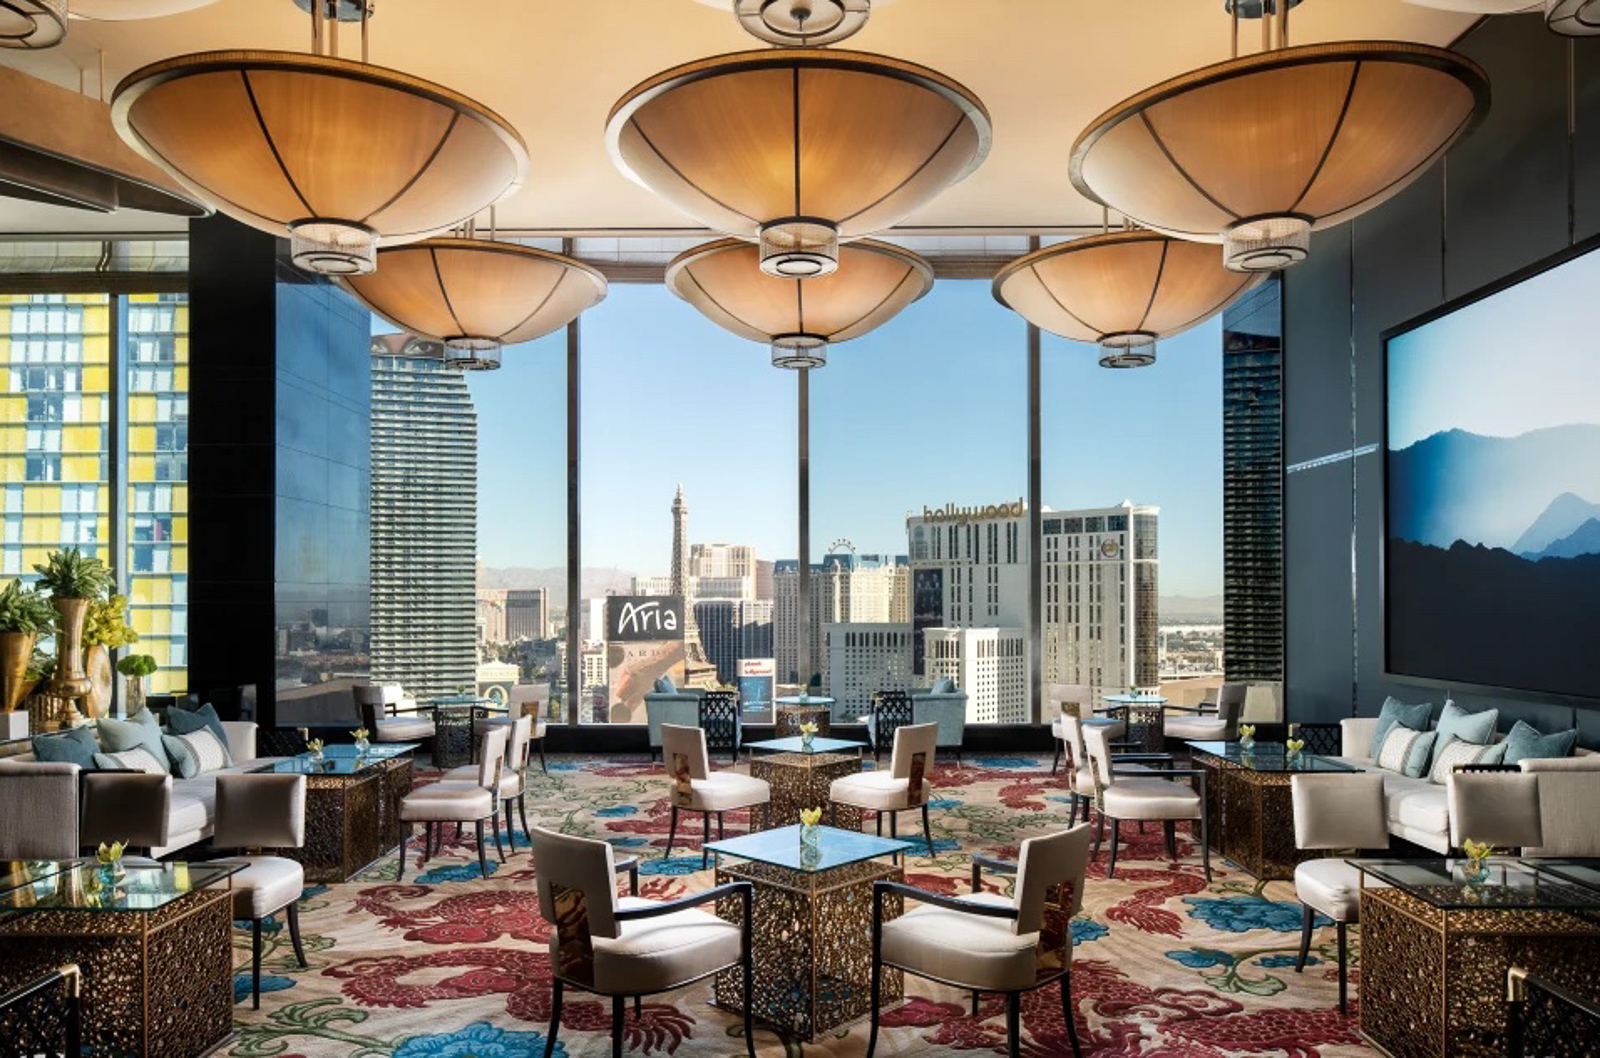 Four Seasons hotel Las Vegas review - Turning left for less